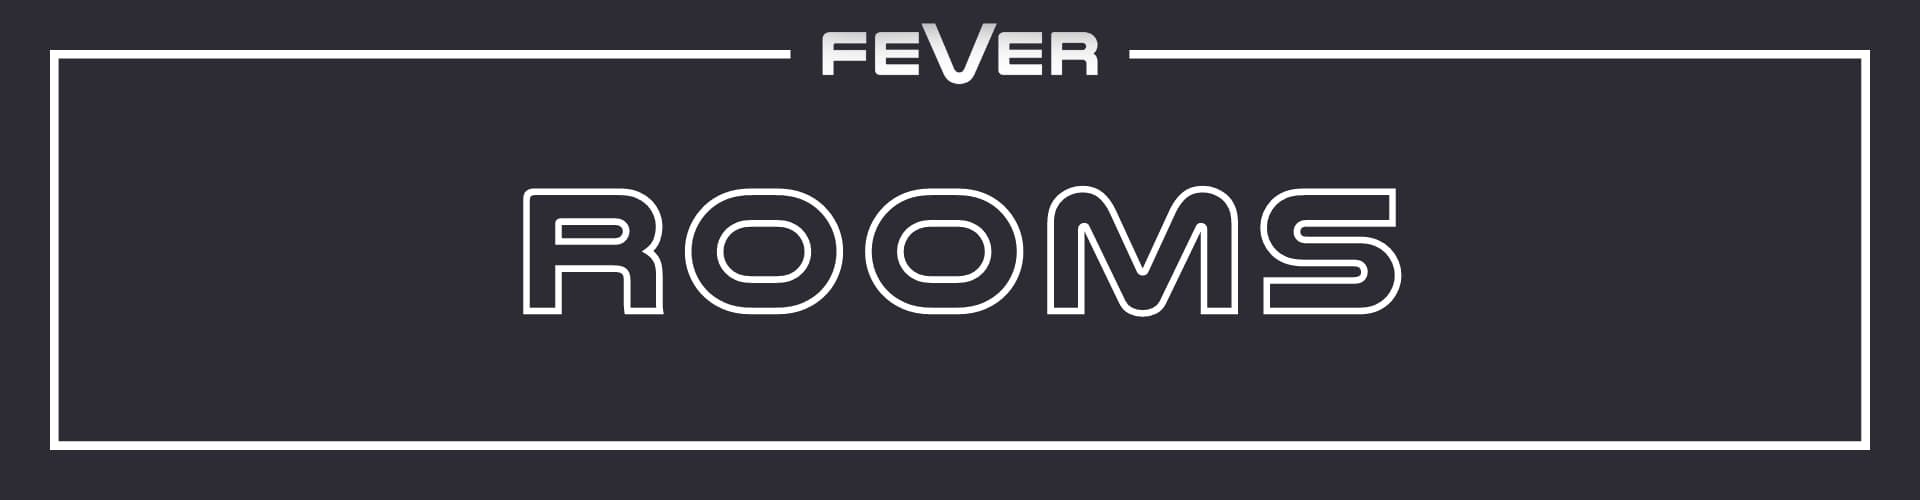 Fever Rooms